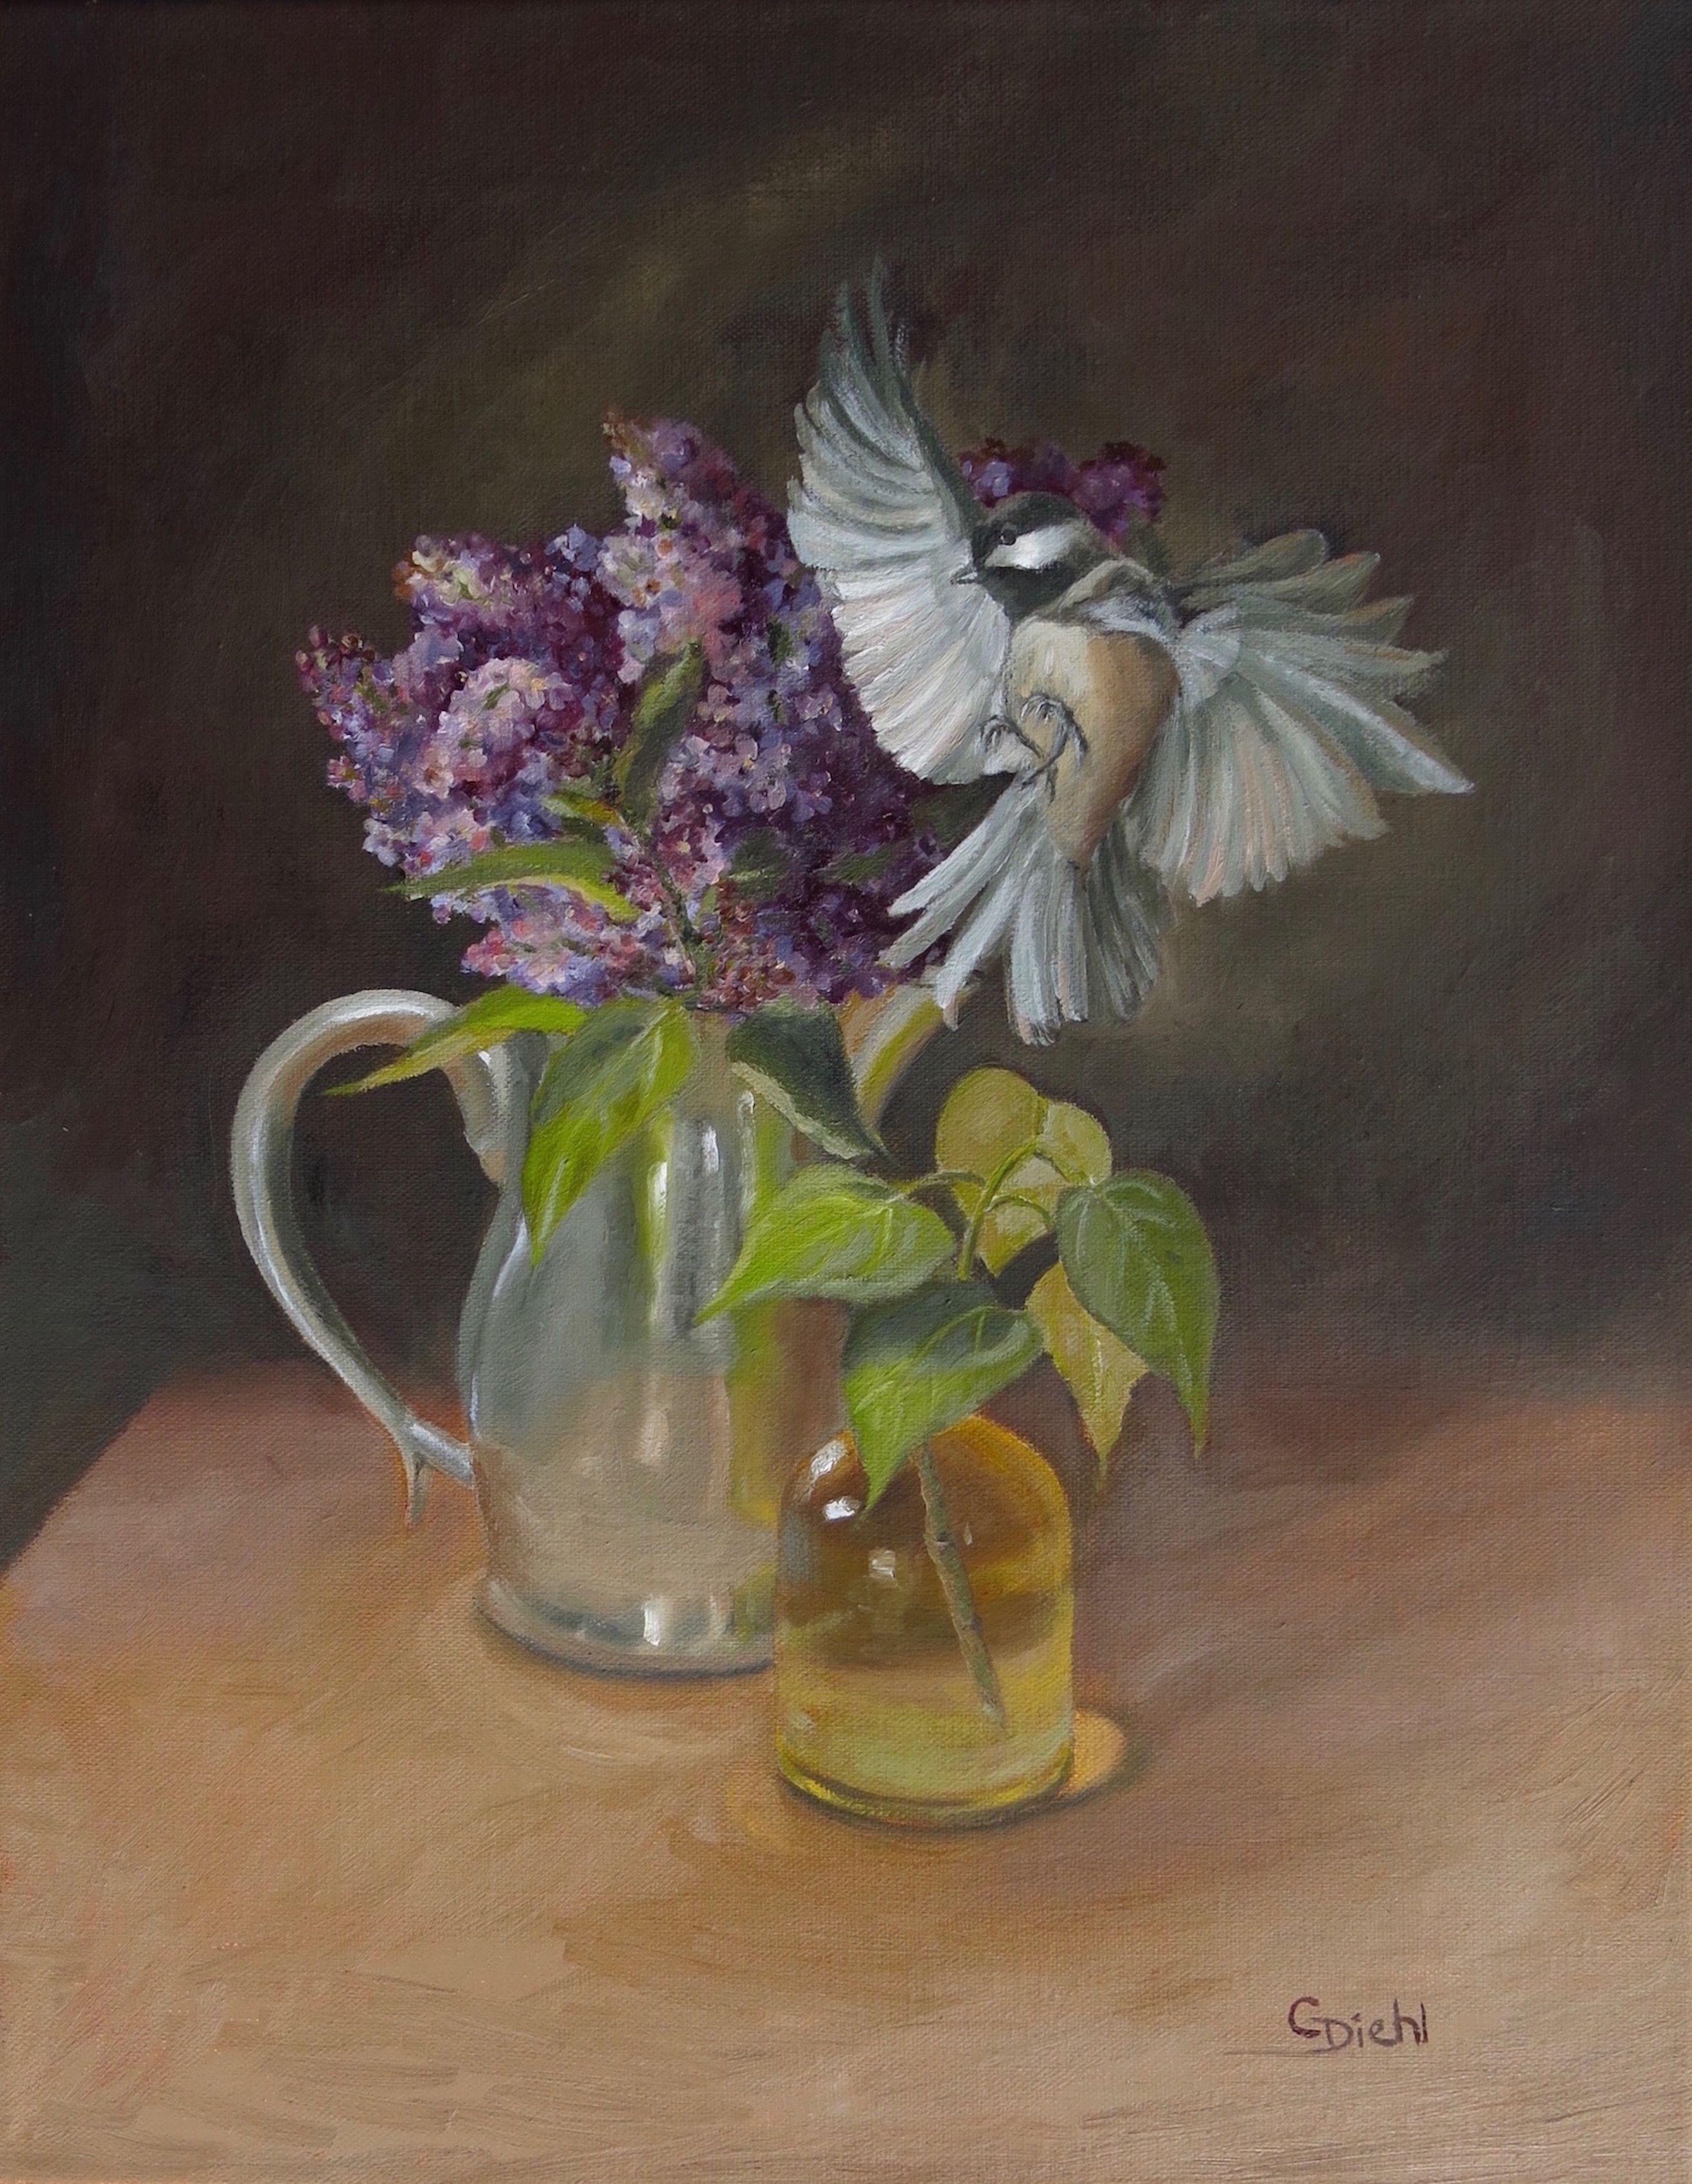 A bird in flight can be seen flying over the still life of objects containing ivy and a lilac floral. This fine art piece has been created in the realism style on a 11"x14" linen canvas. The frame measures 17"x20" and is wired for hanging. Please